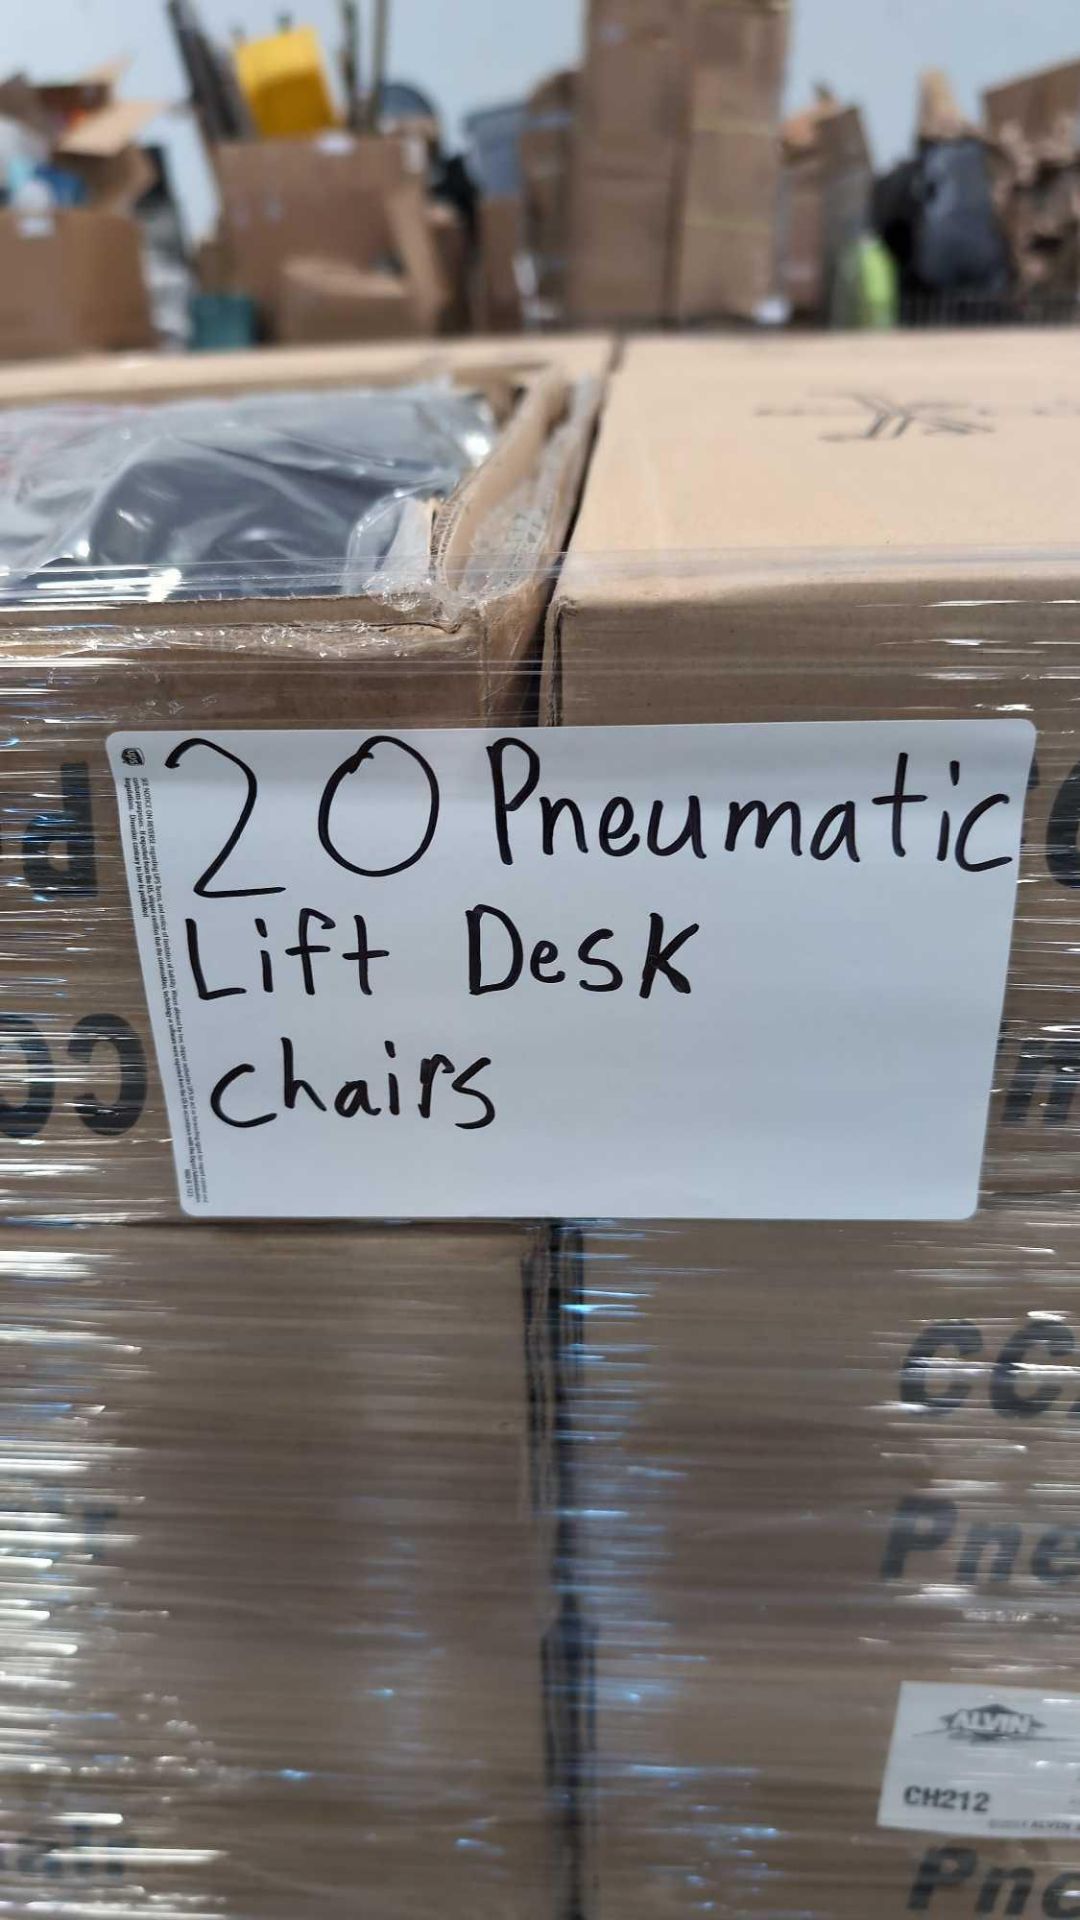 20 Pneumatic Lift Desk Chairs - Image 2 of 5